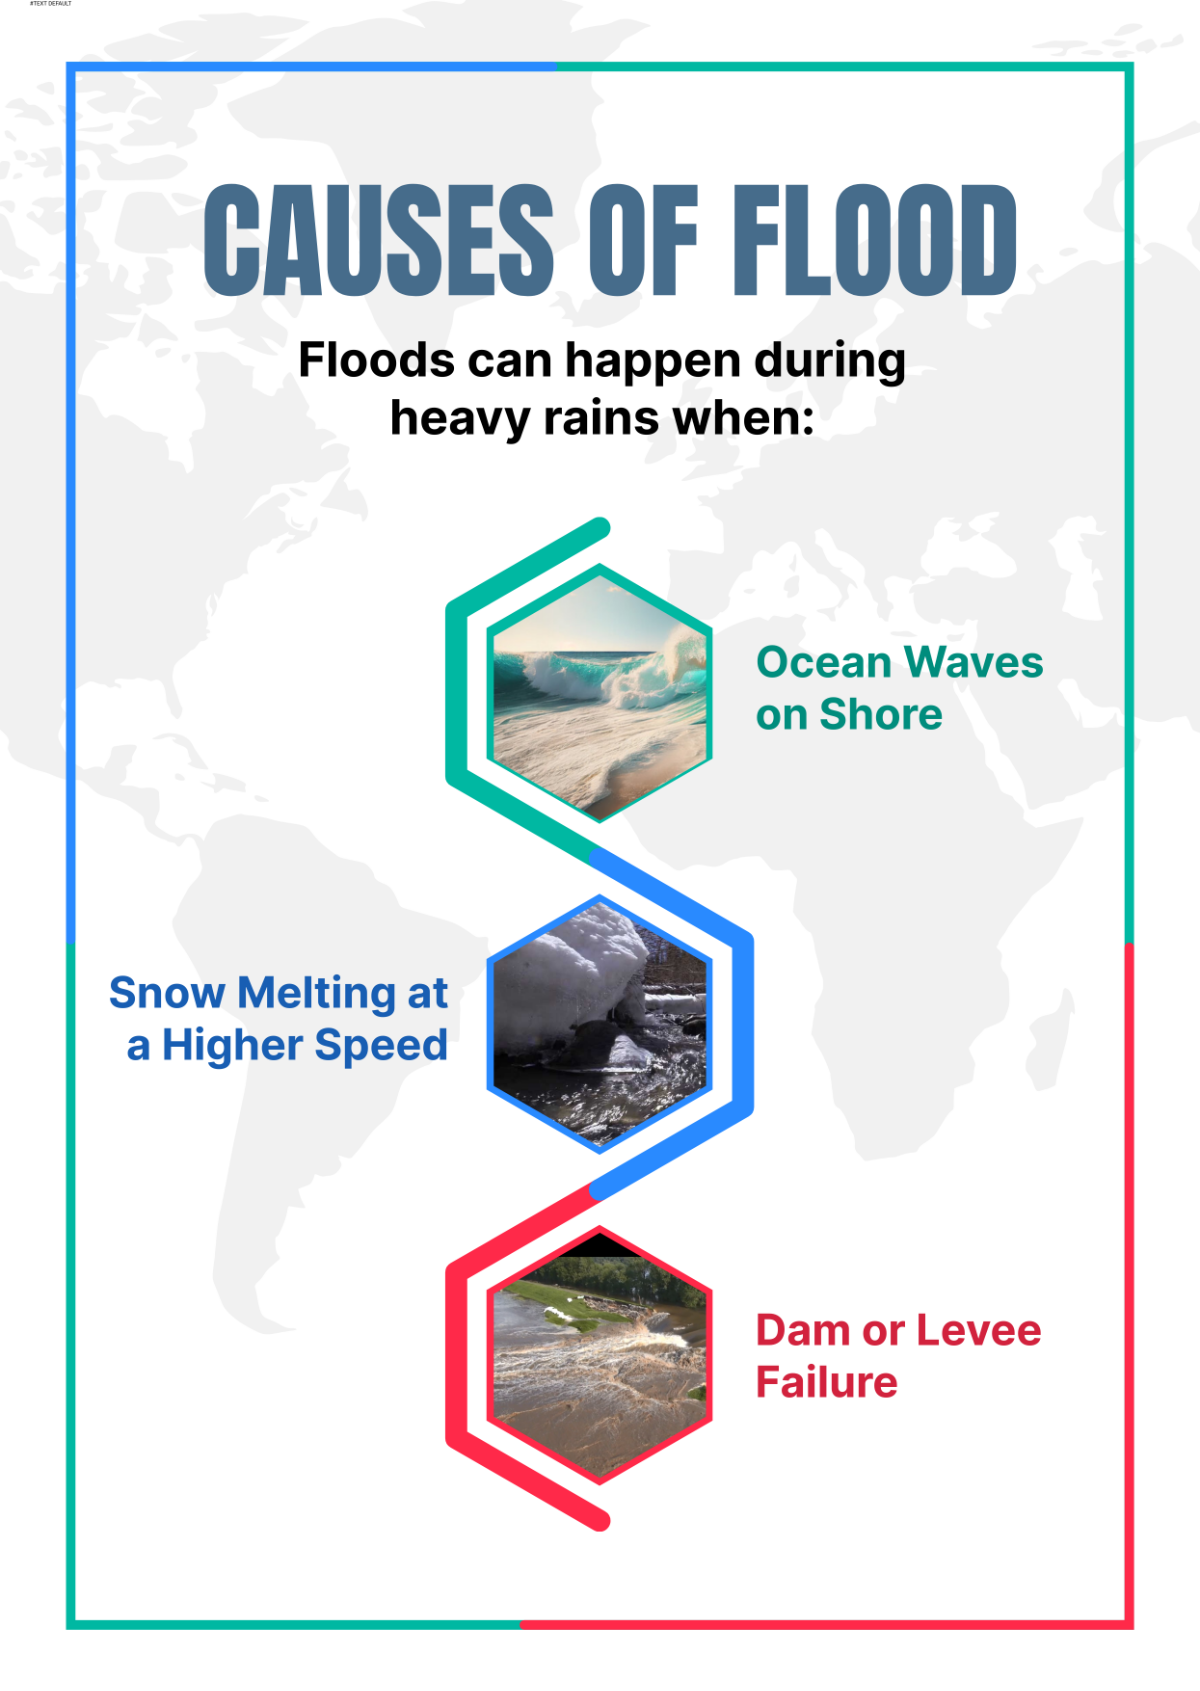 Causes of Flood Infographic